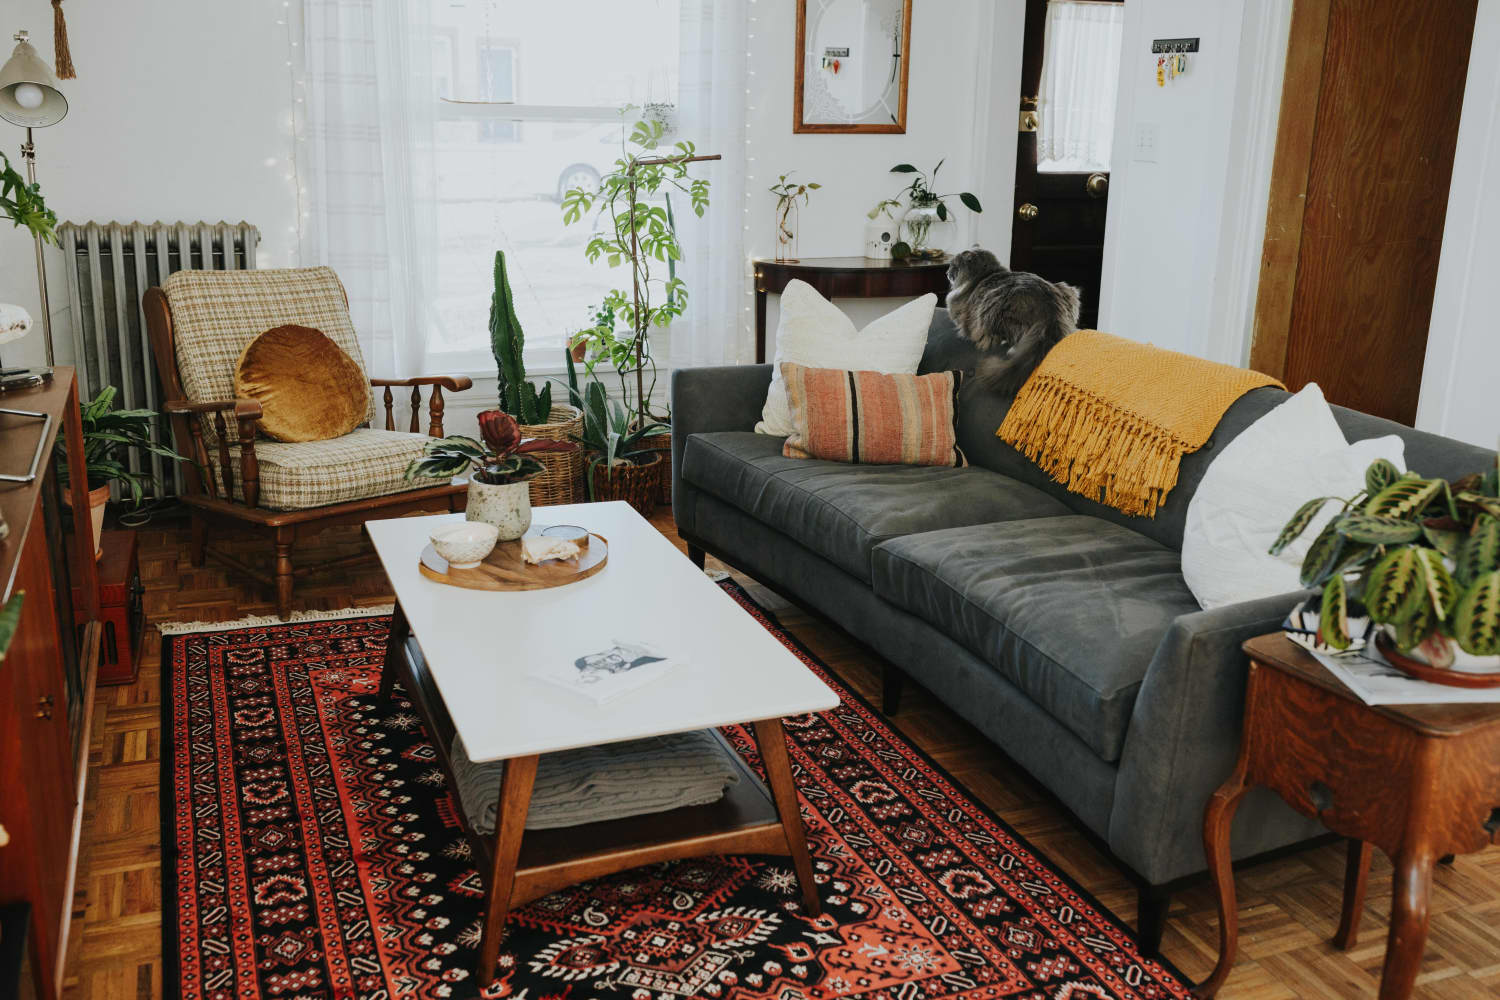 The Best Apartment Hunting Advice, According To Reddit | Apartment Therapy